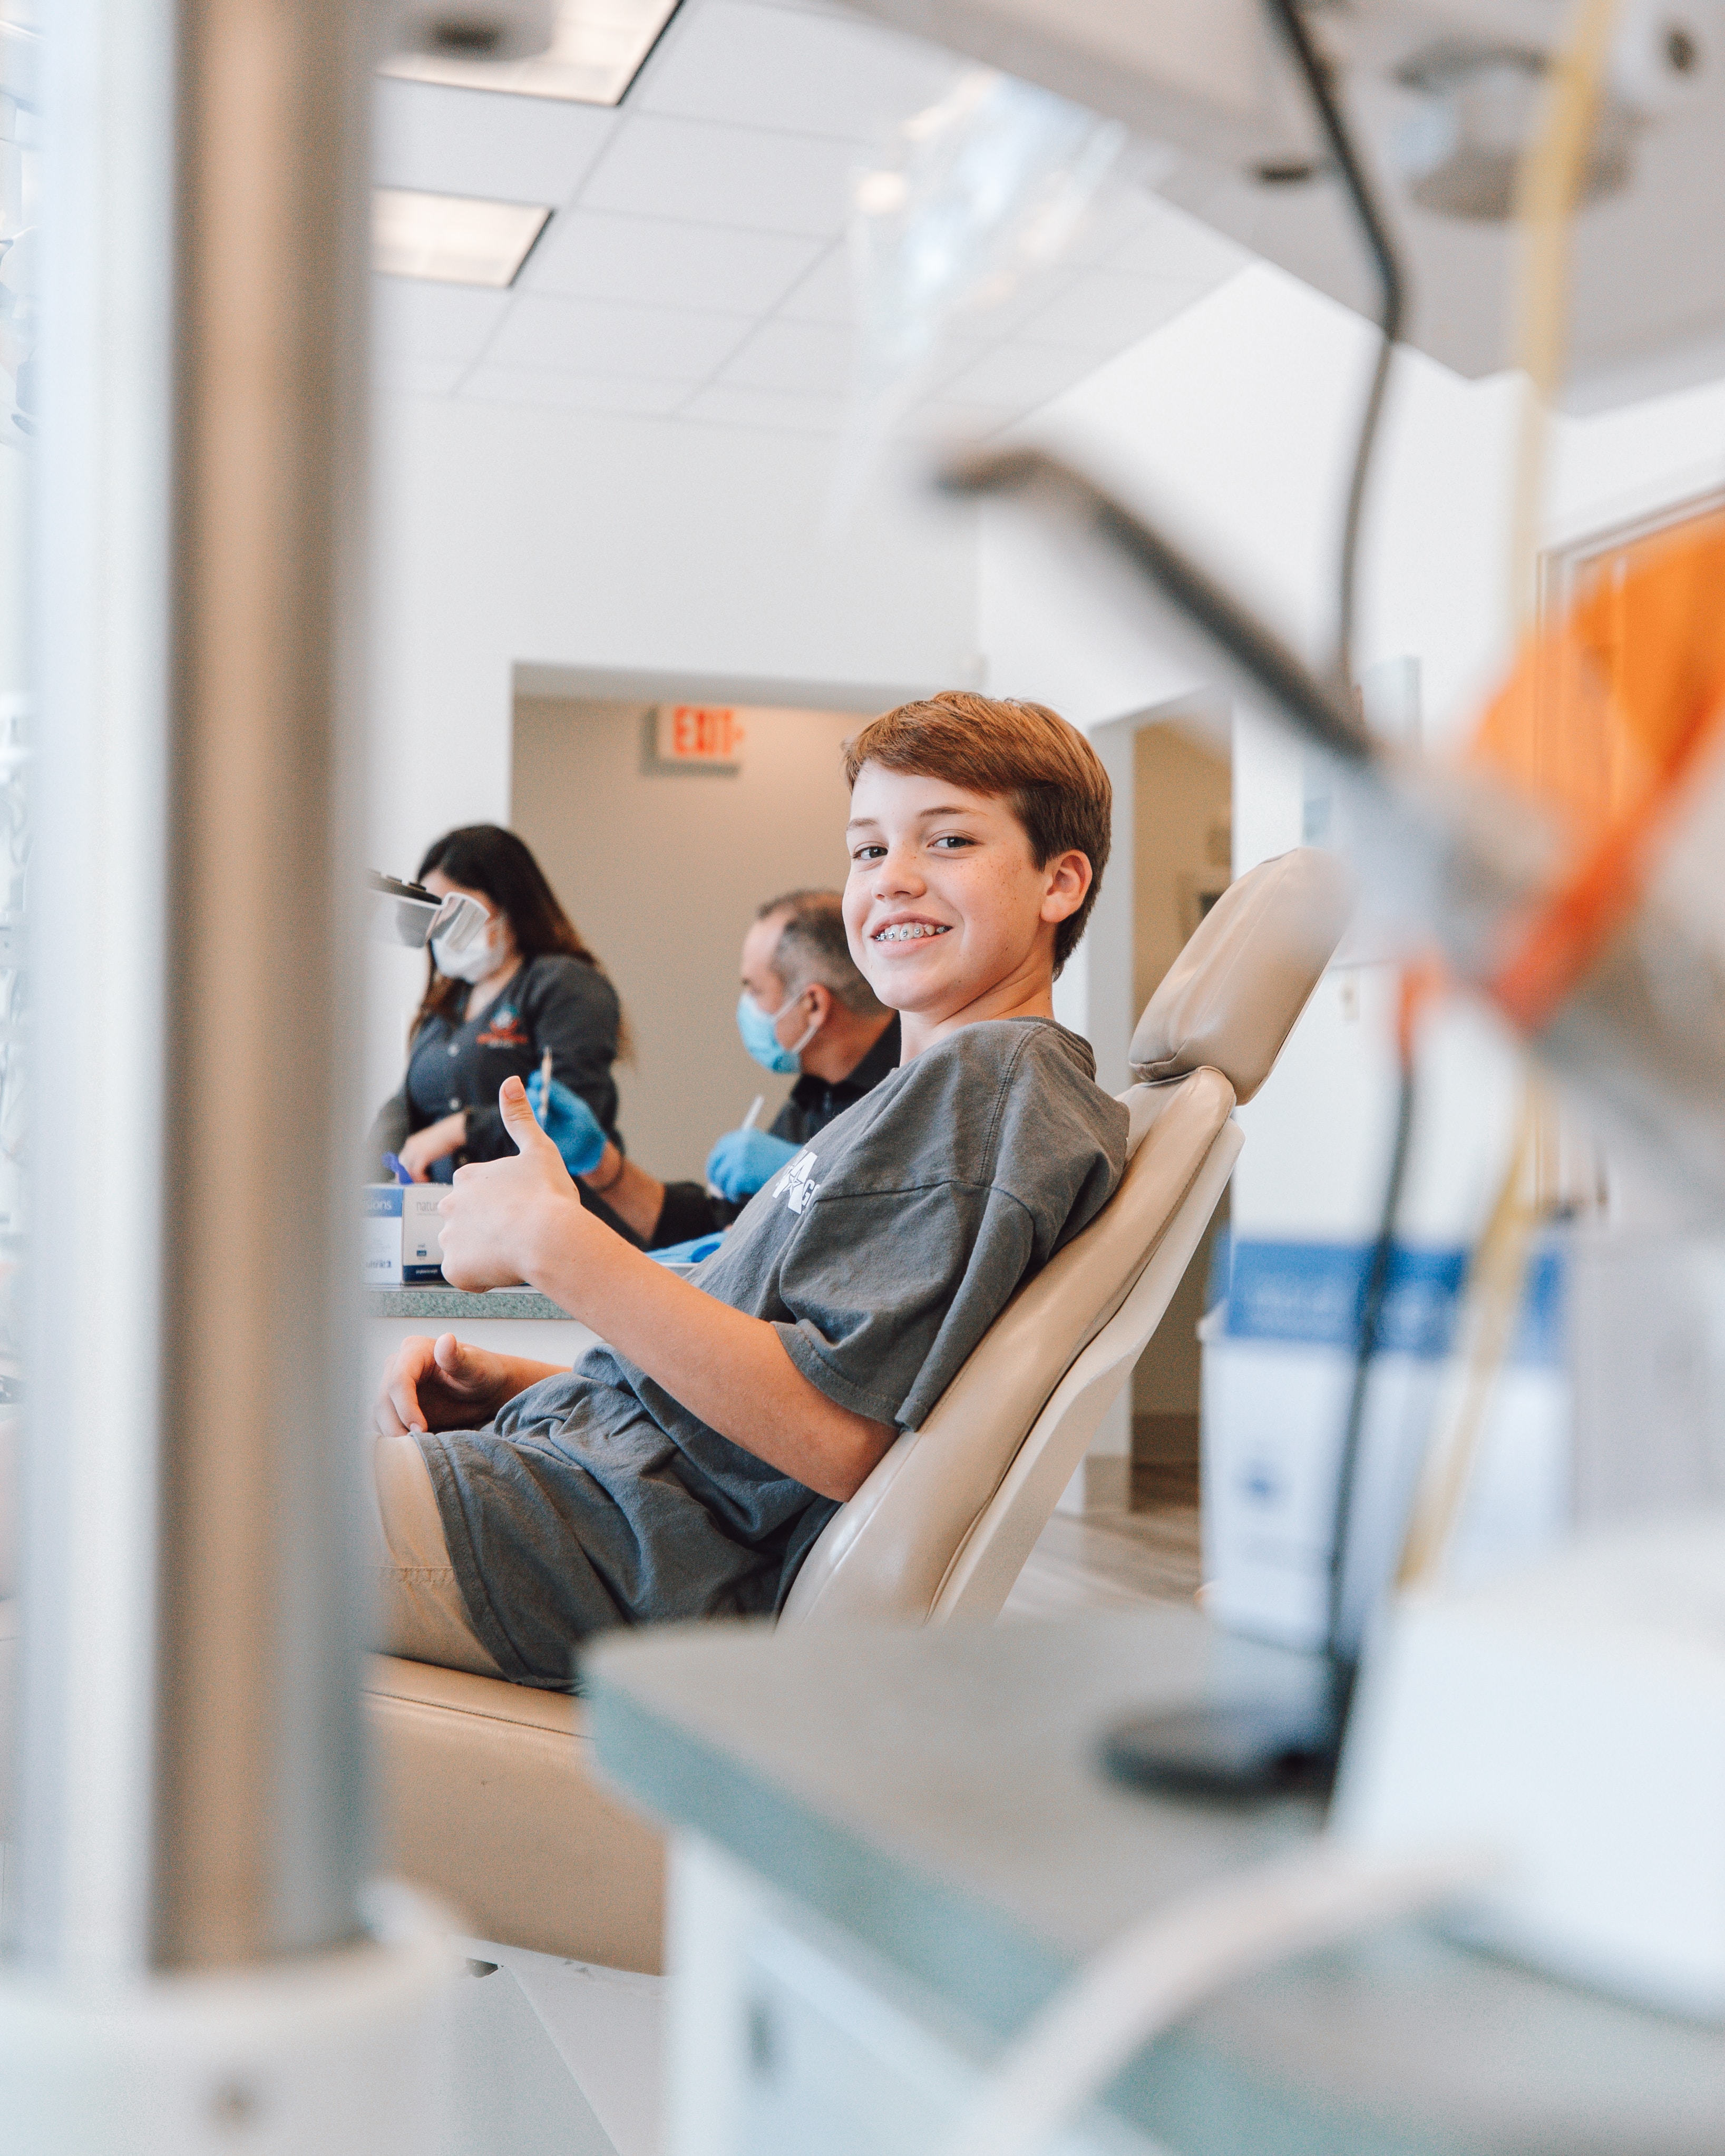 Children under 15 years old can enjoy free dental care